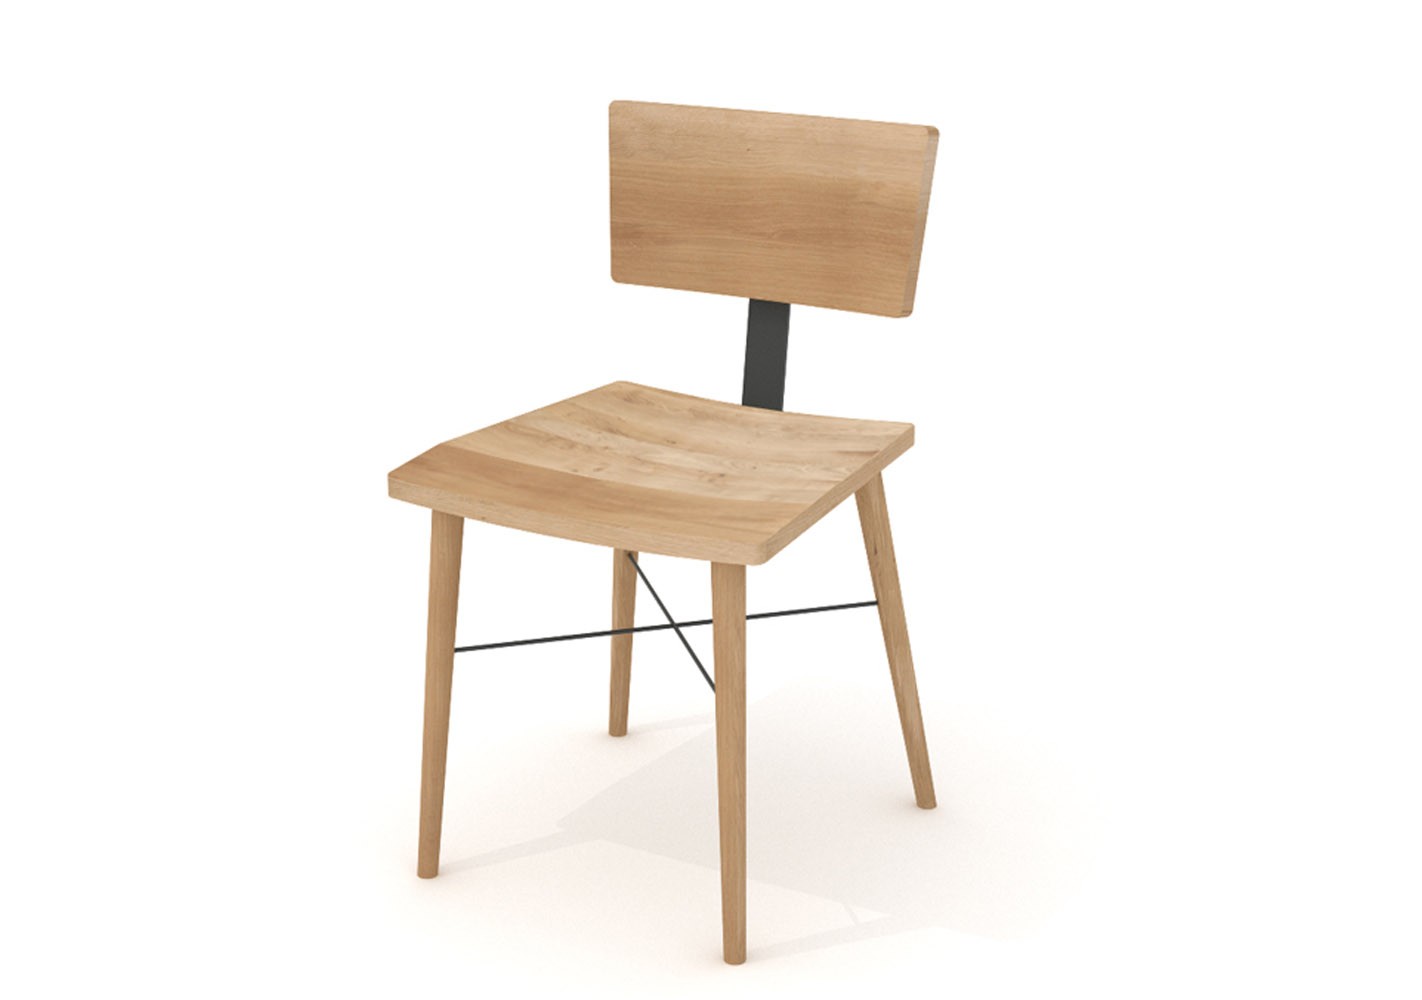 DOWEL Chair by Jonas Wahlström for Universo Positivo